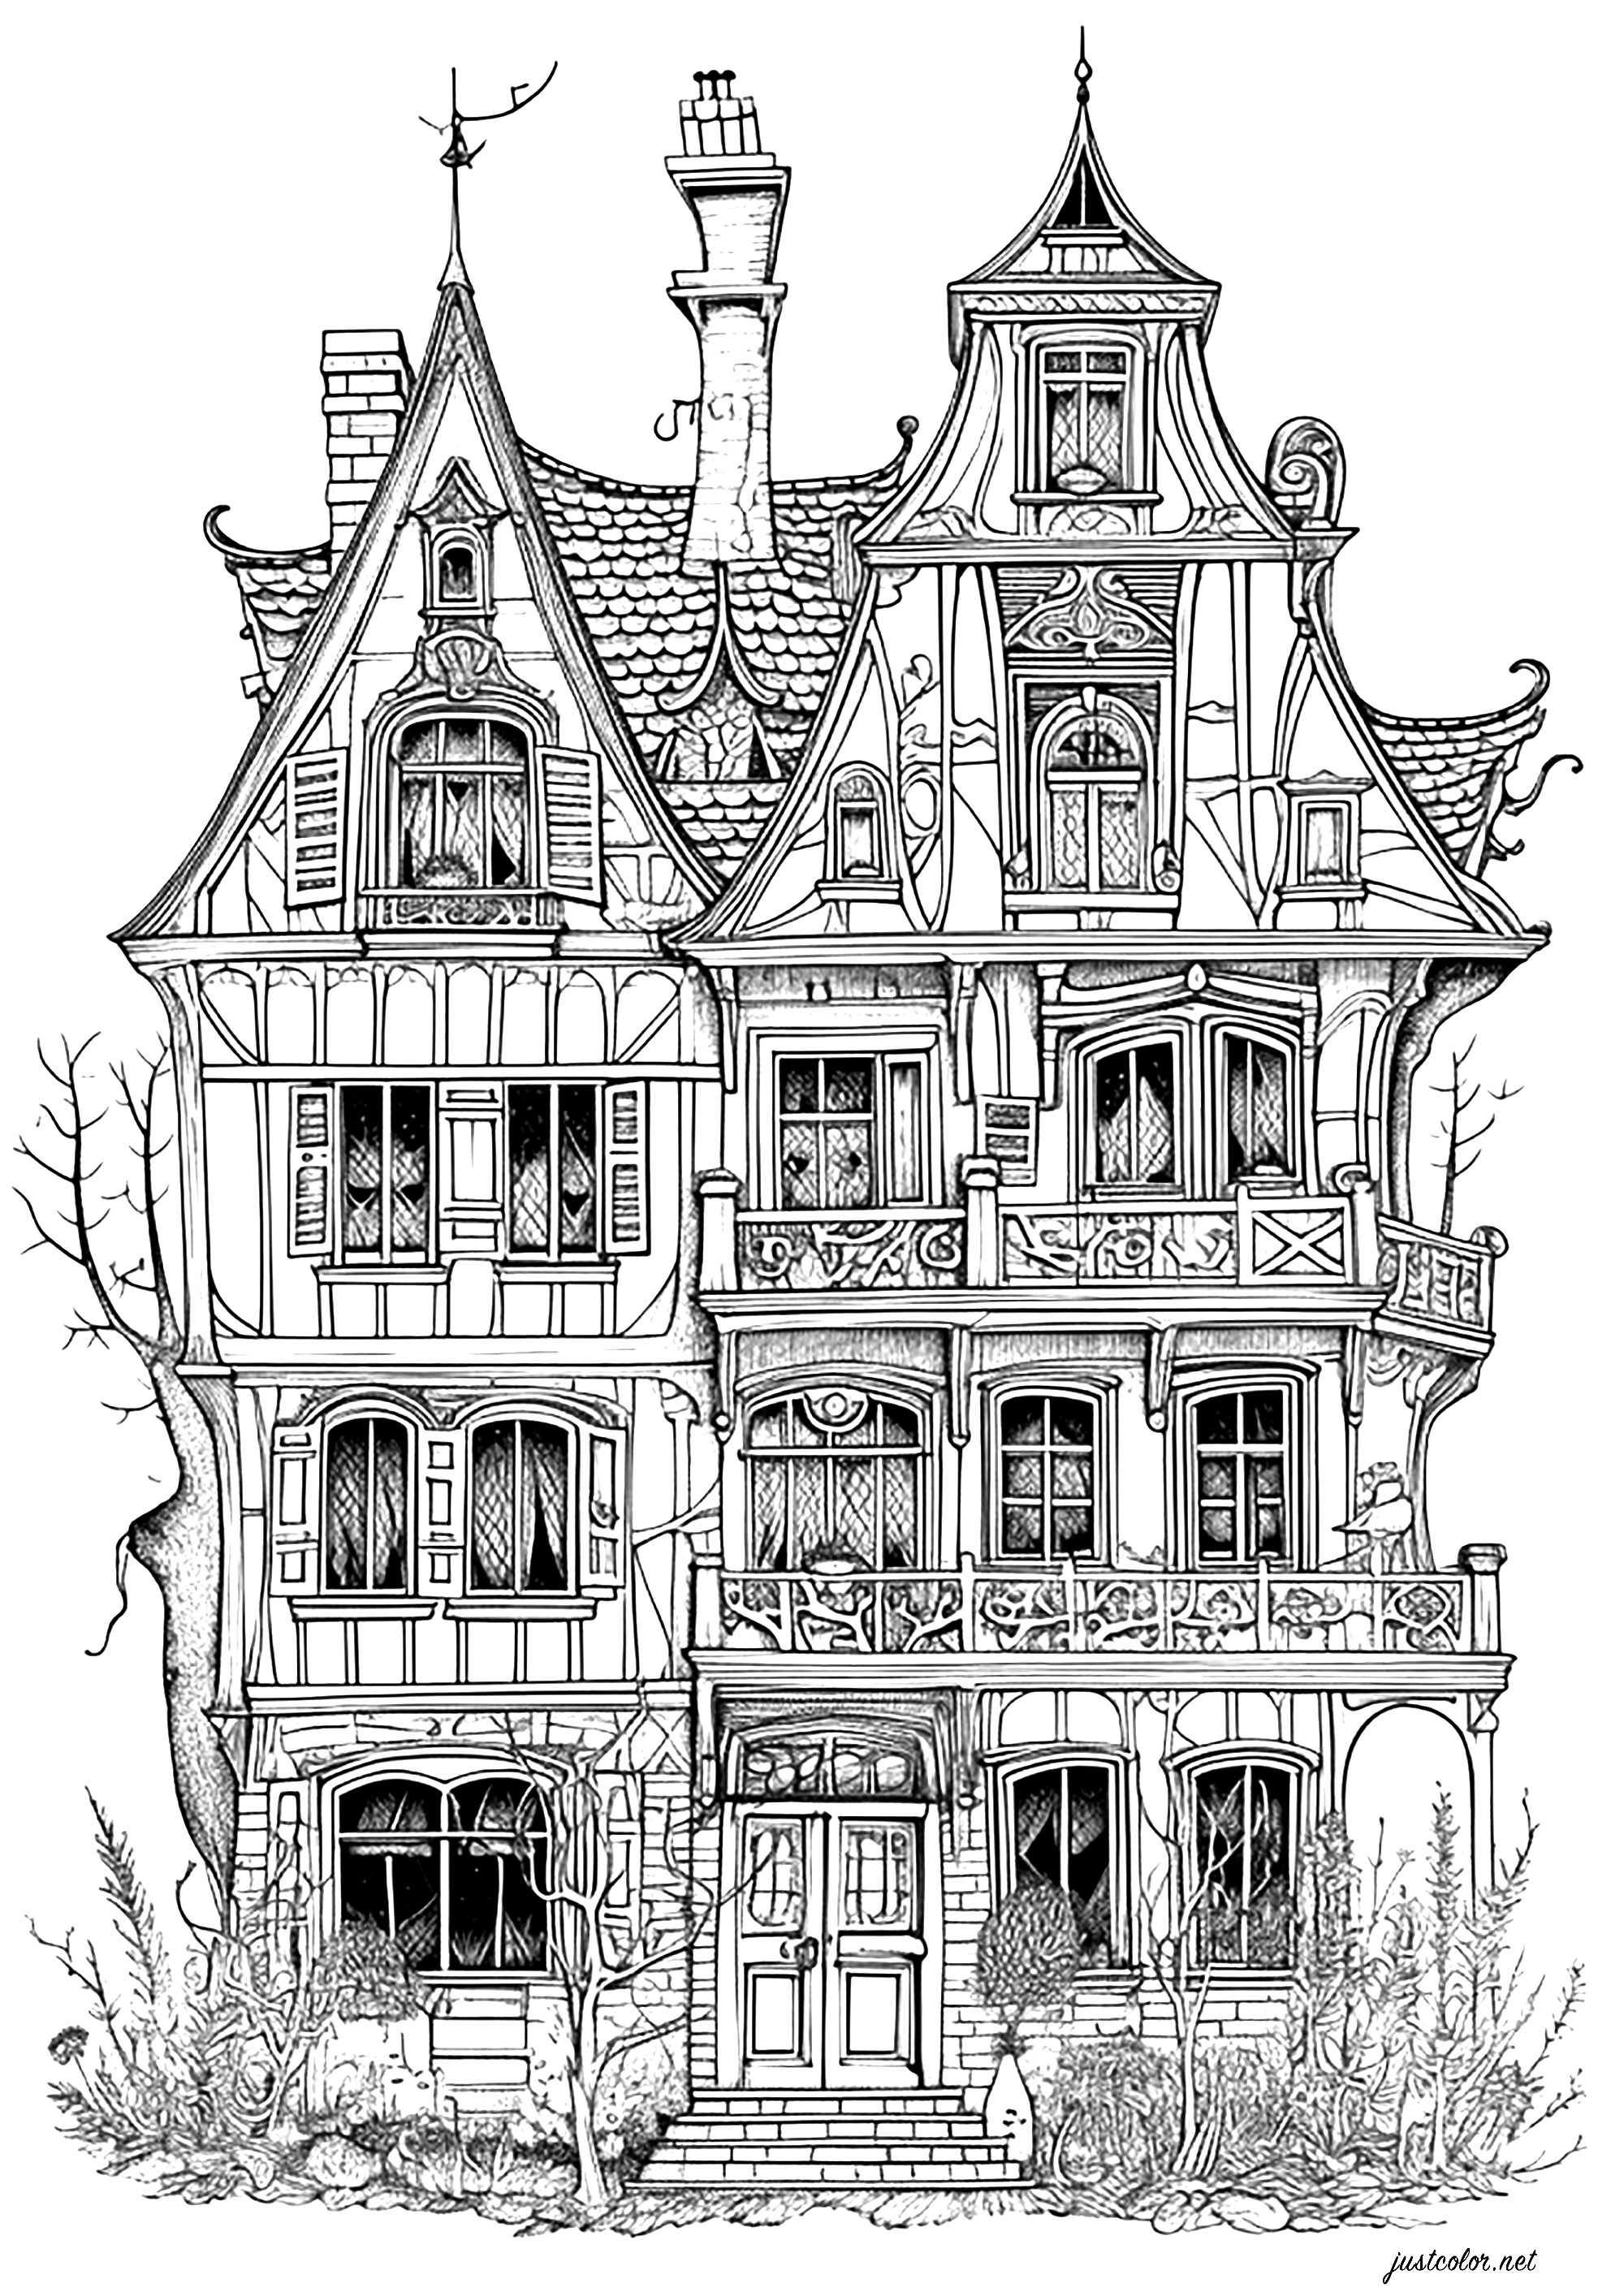 Haunted house with many floors. This house could be home to a large family of watches!